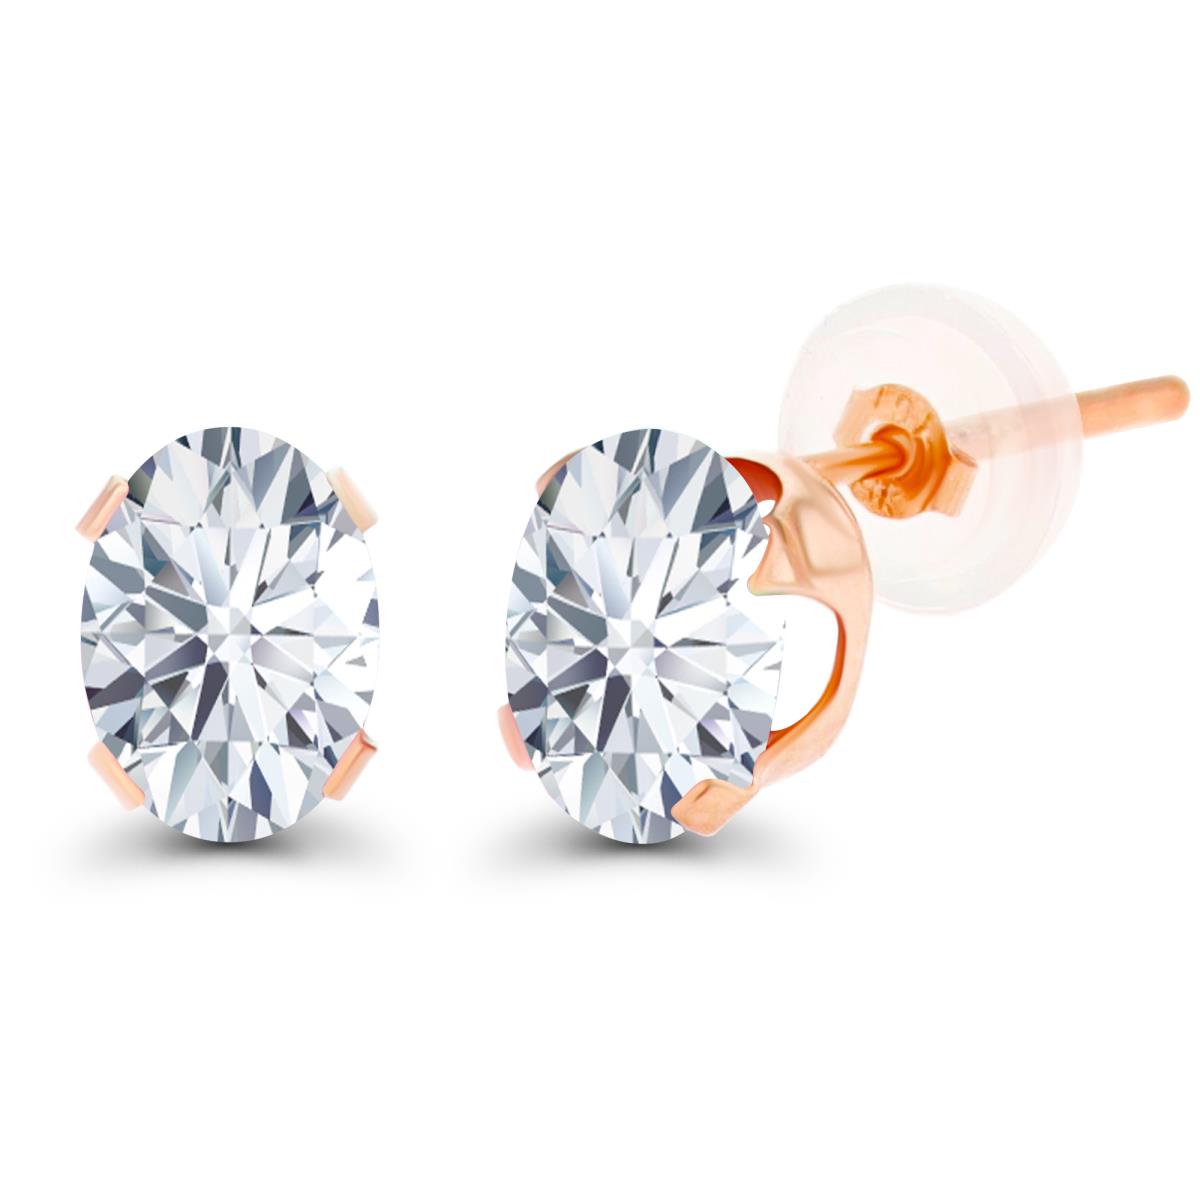 10K Rose Gold 7x5mm Oval Cr White Sapphire Stud Earring with Silicone Back